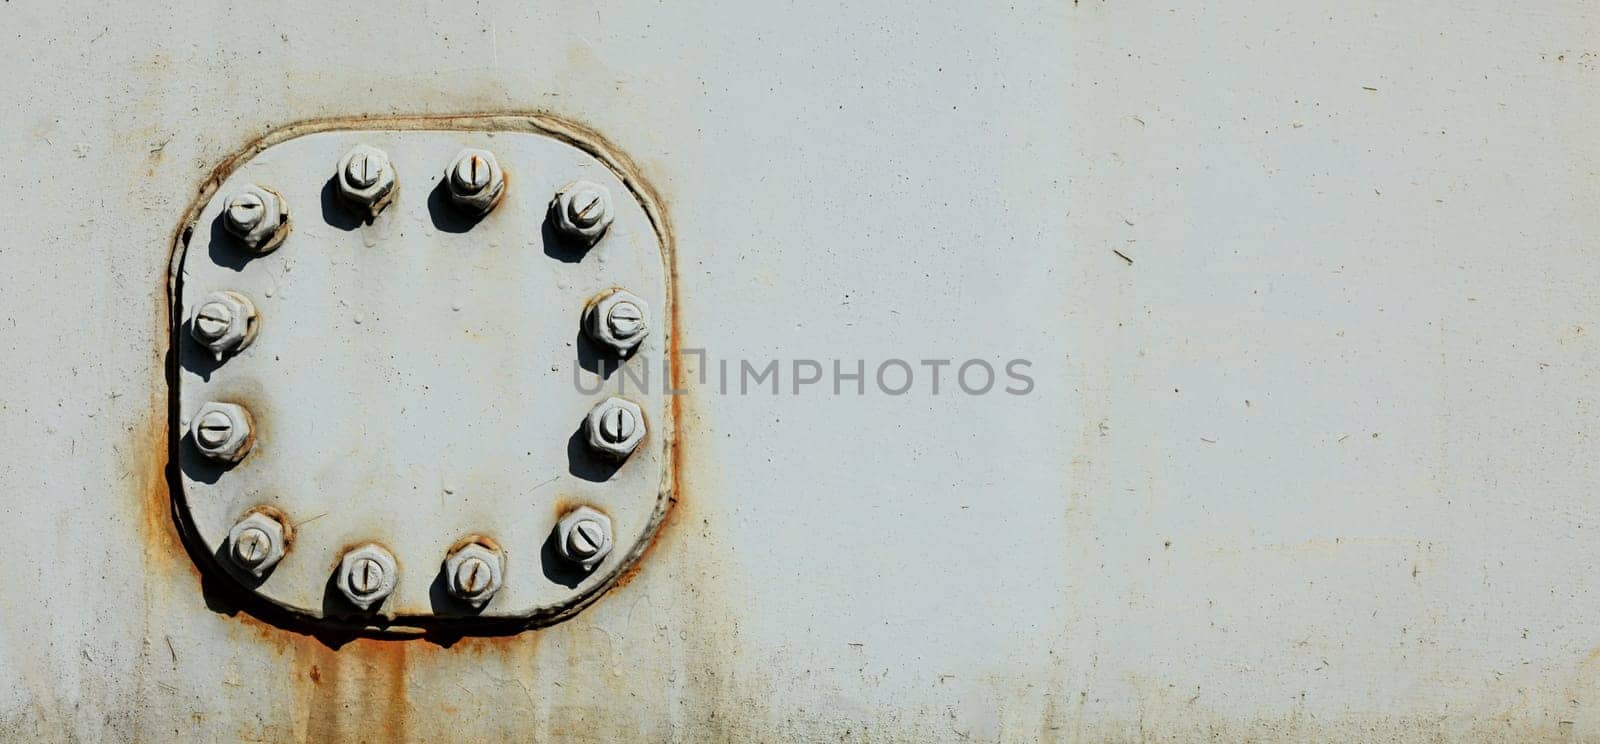 Large nuts and bolts on gray steel plate of rail bridge, lit by bright sun. Abstract industrial background, space for text on the right. by Ivanko